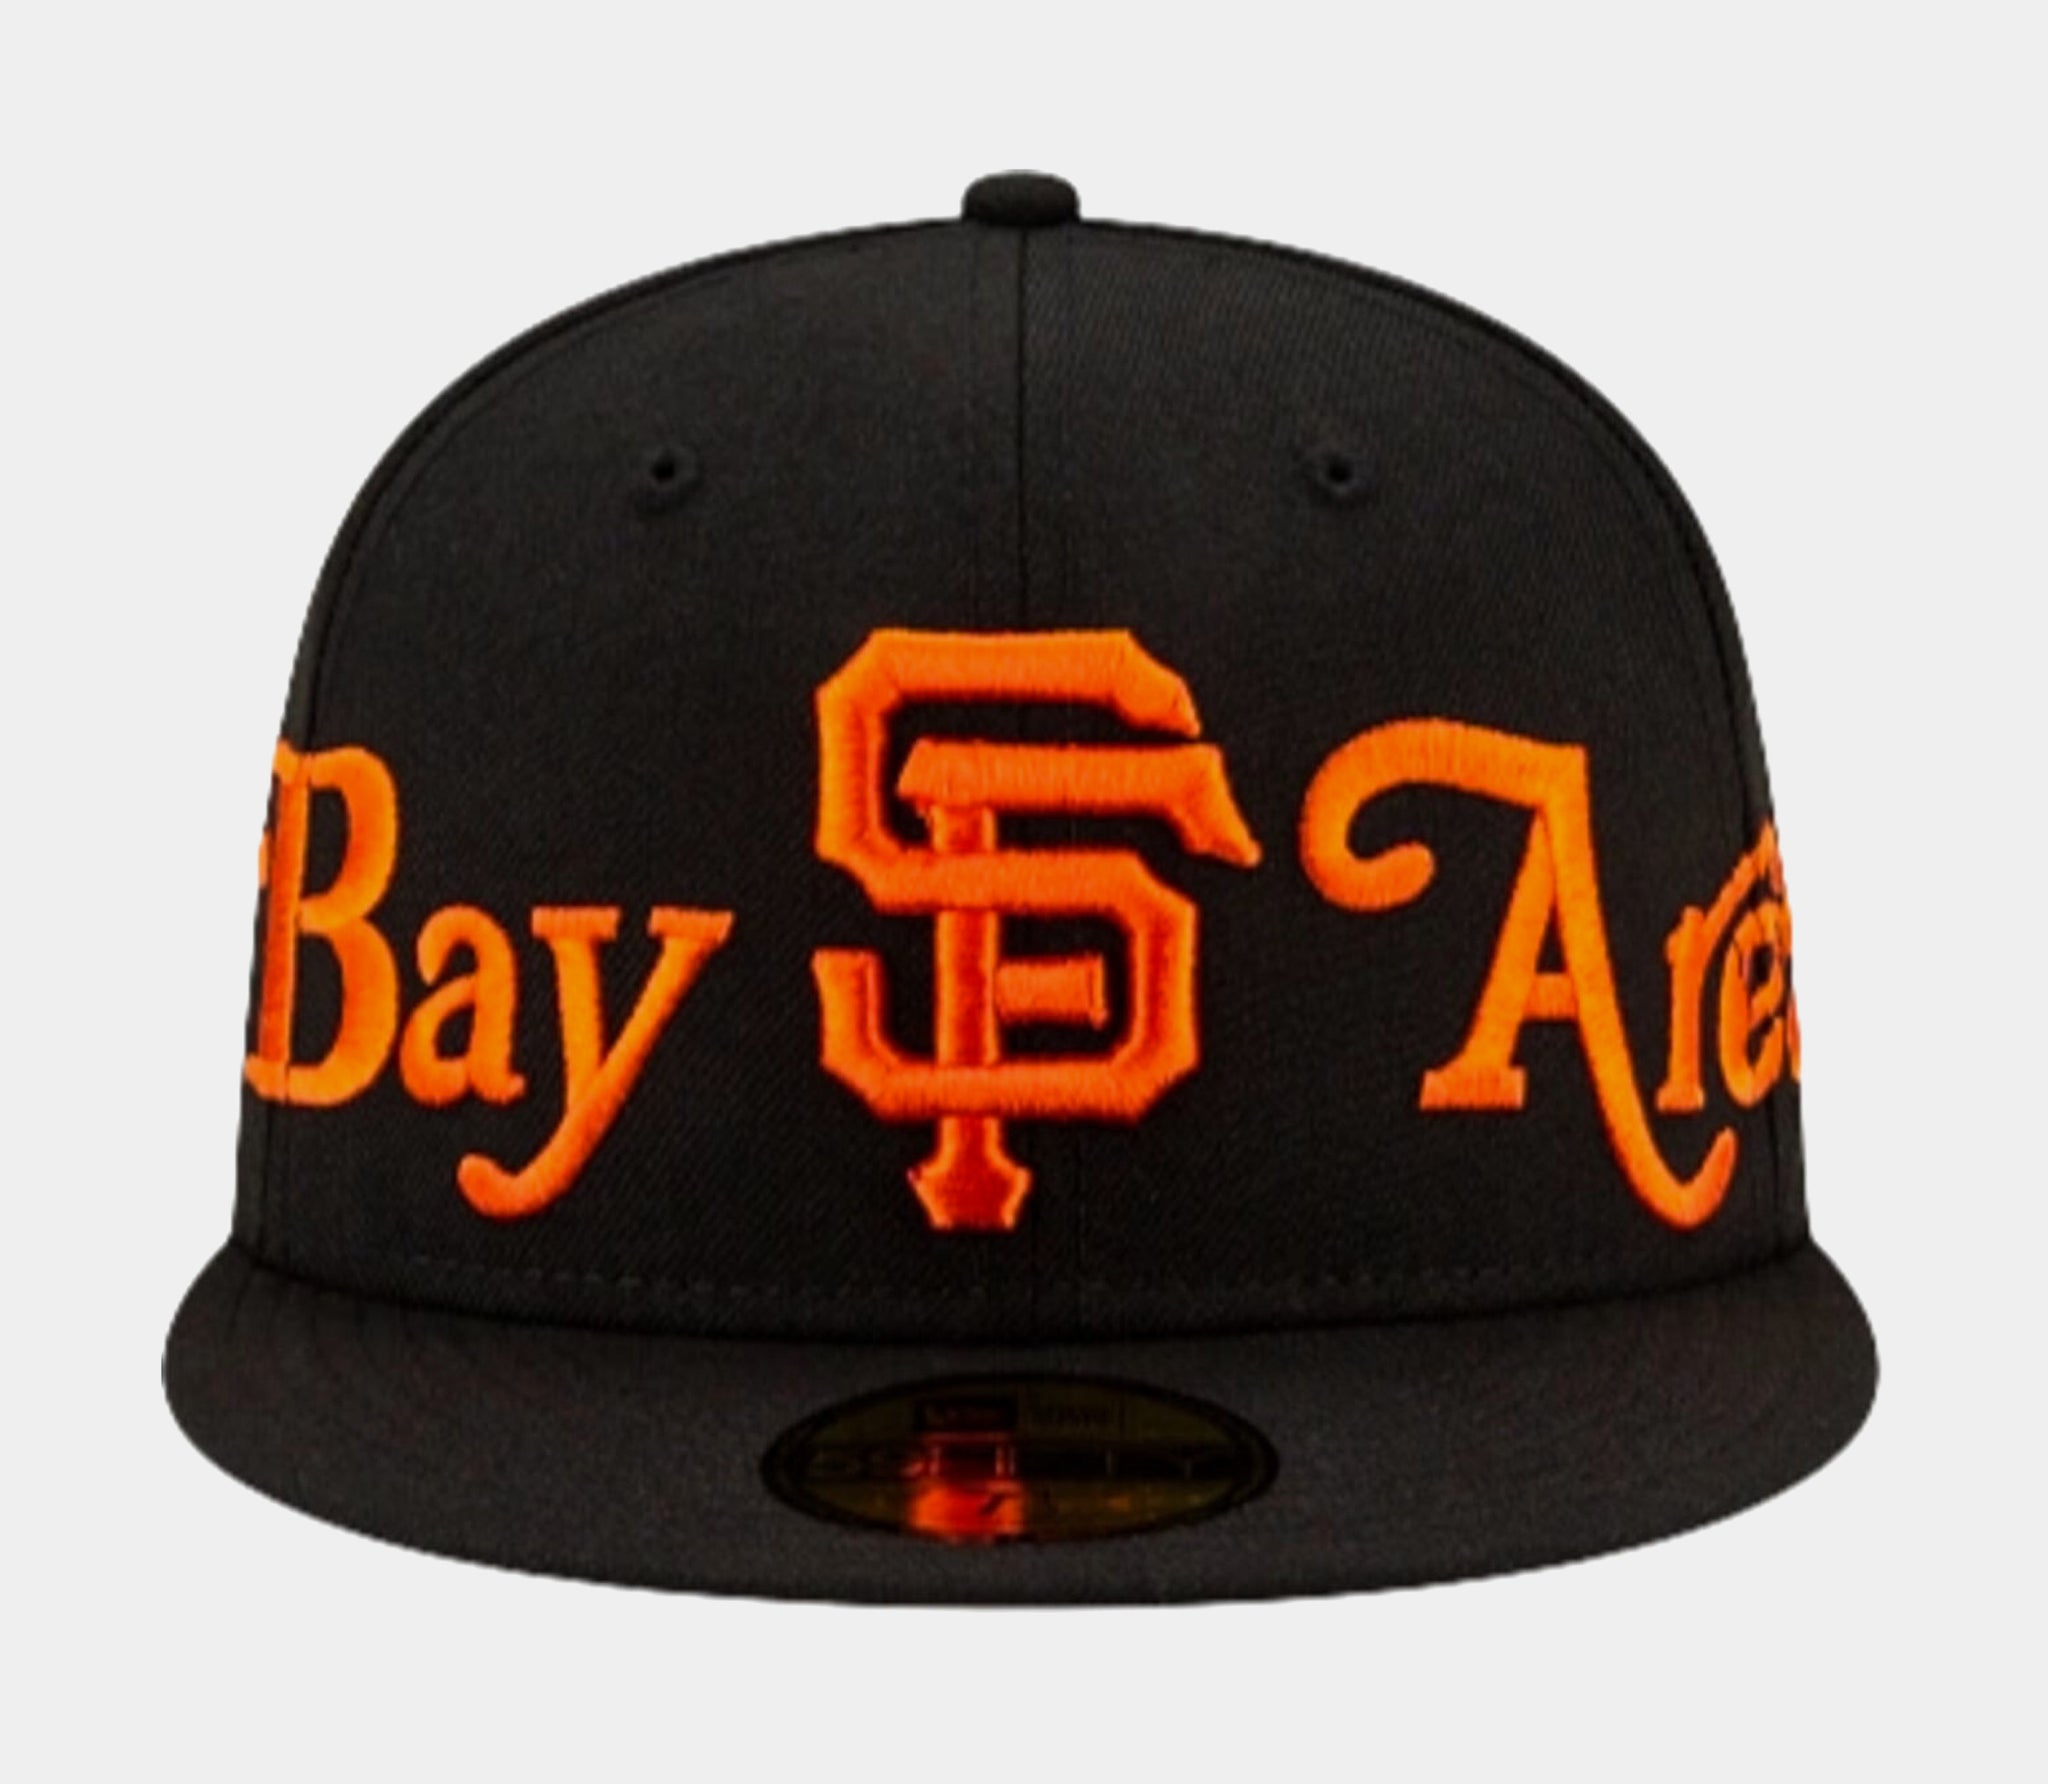 New Era Men's Stone and Black San Francisco Giants Retro 59FIFTY Fitted Hat